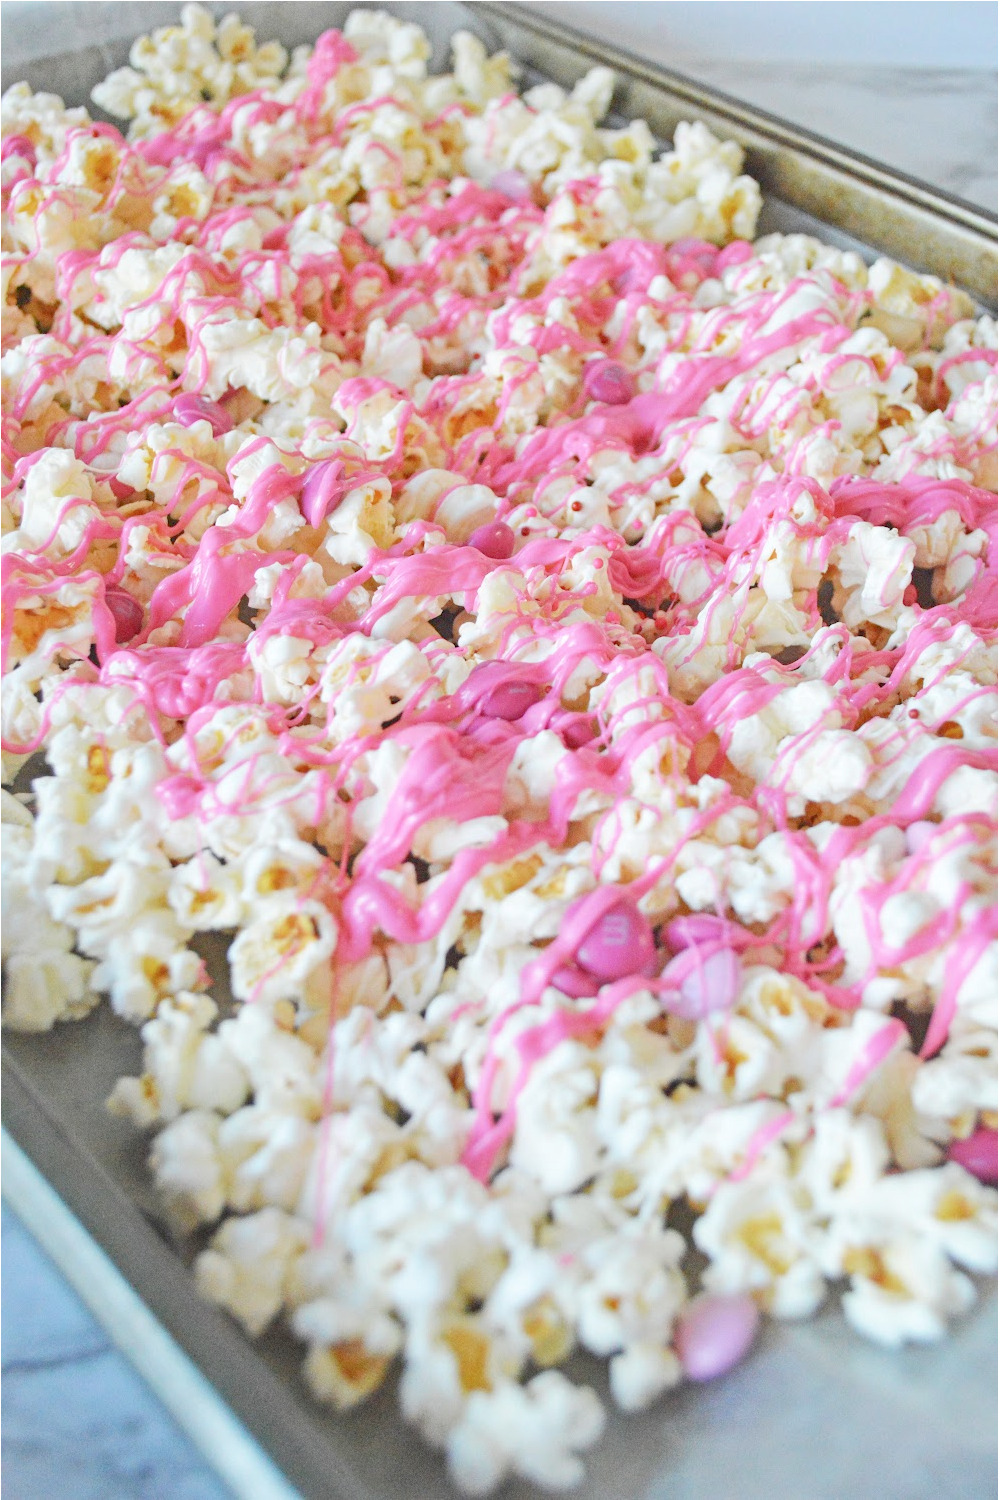 Valentines Popcorn with white and pink candy melts drizzled on top with pink M&Ms.